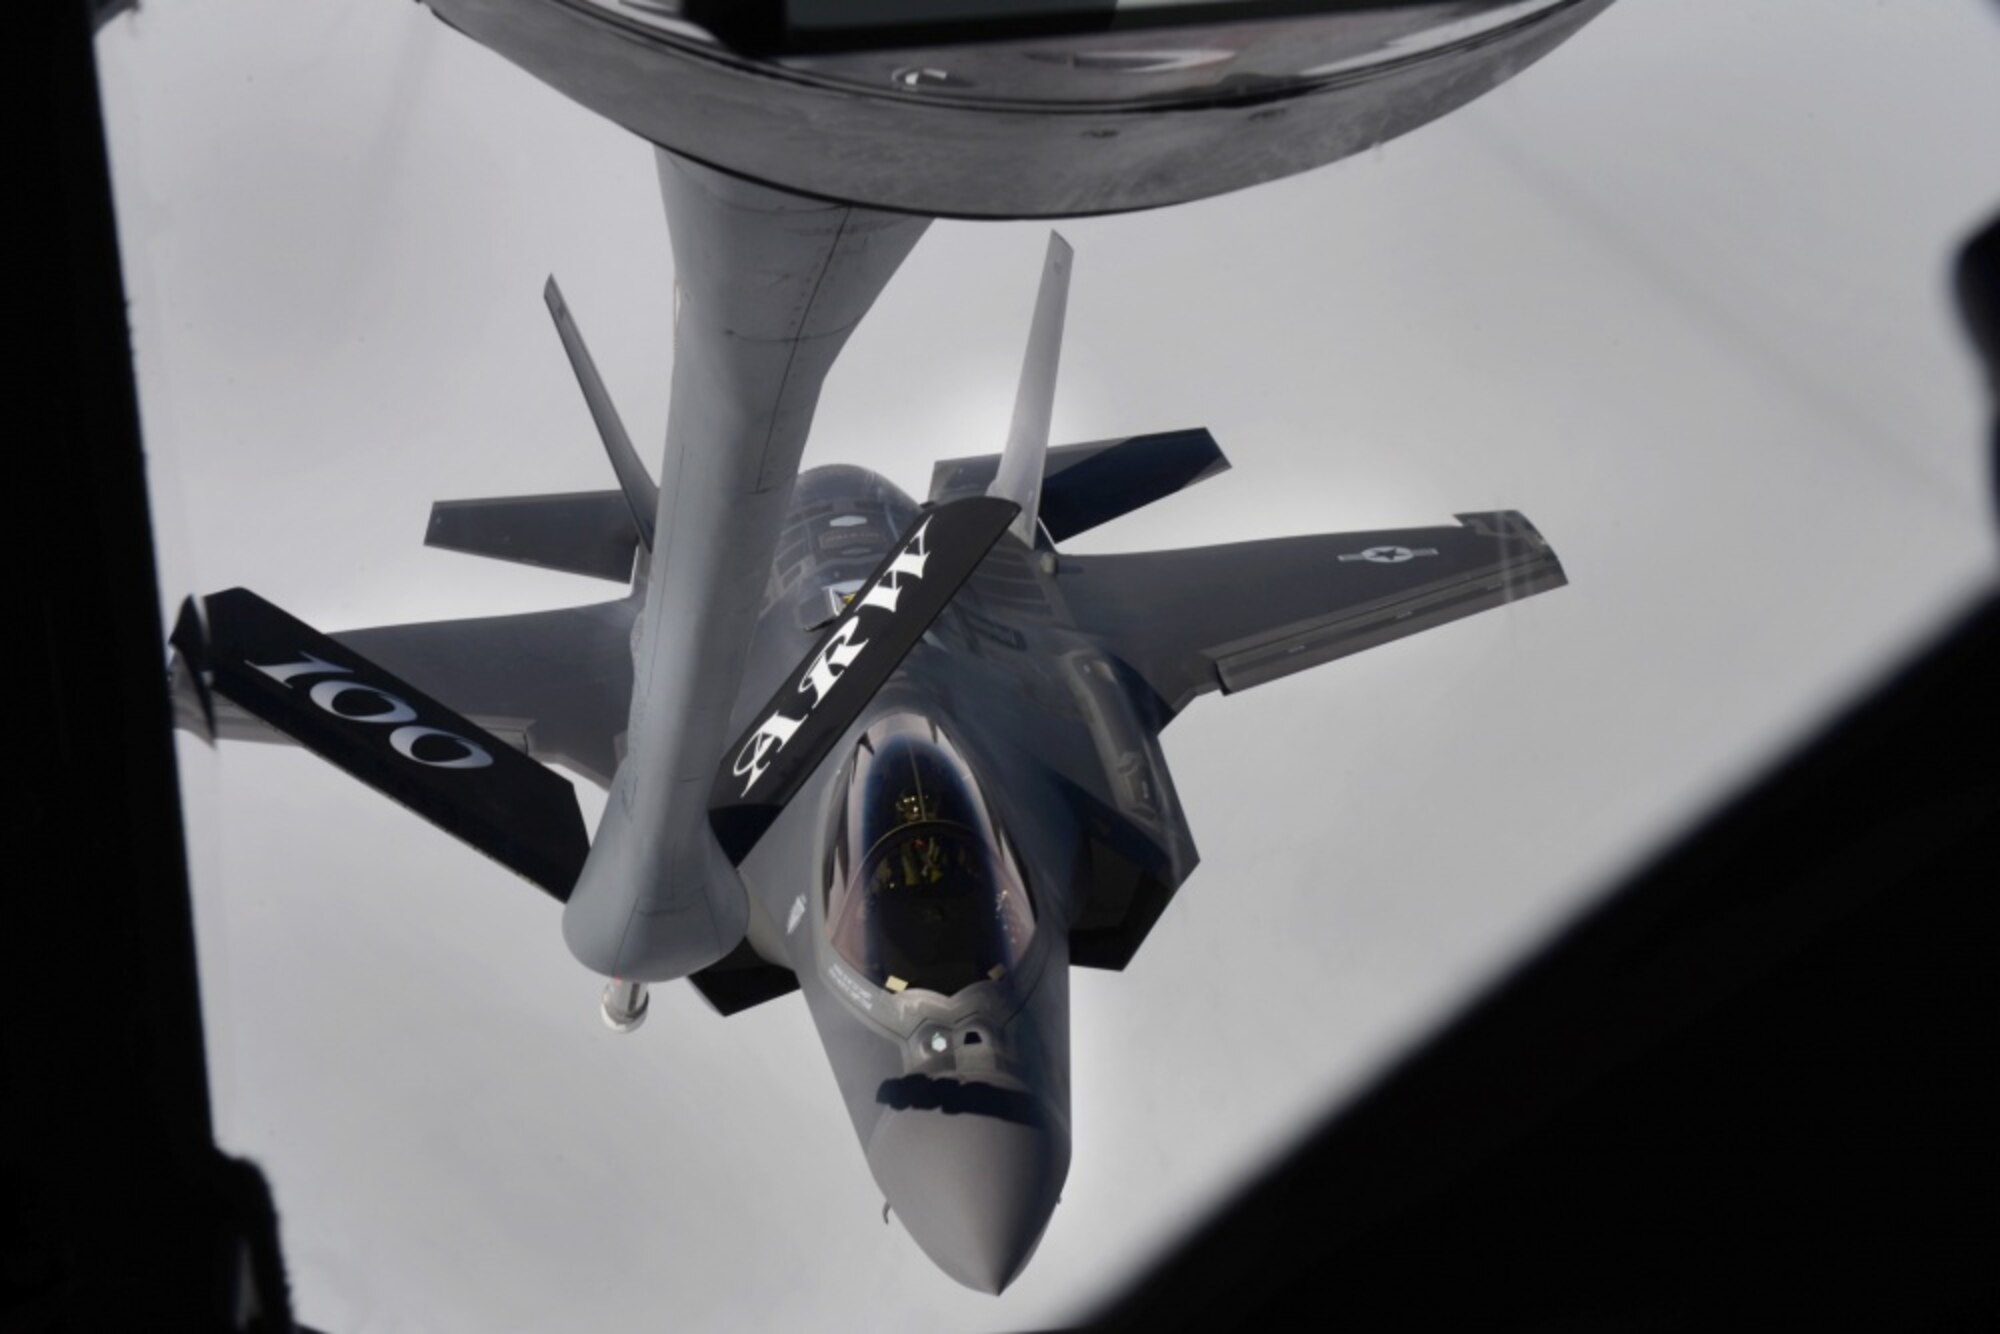 An F-35A Lightning II receives fuel from a 100th Air Refueling Wing KC-135 Stratotanker over the Atlantic Ocean April 15, 2017. The F-35As are conducting their first overseas deployment during which they will conduct flying training with NATO partners. (U.S. Air Force photo by Airman 1st Class Tenley Long)